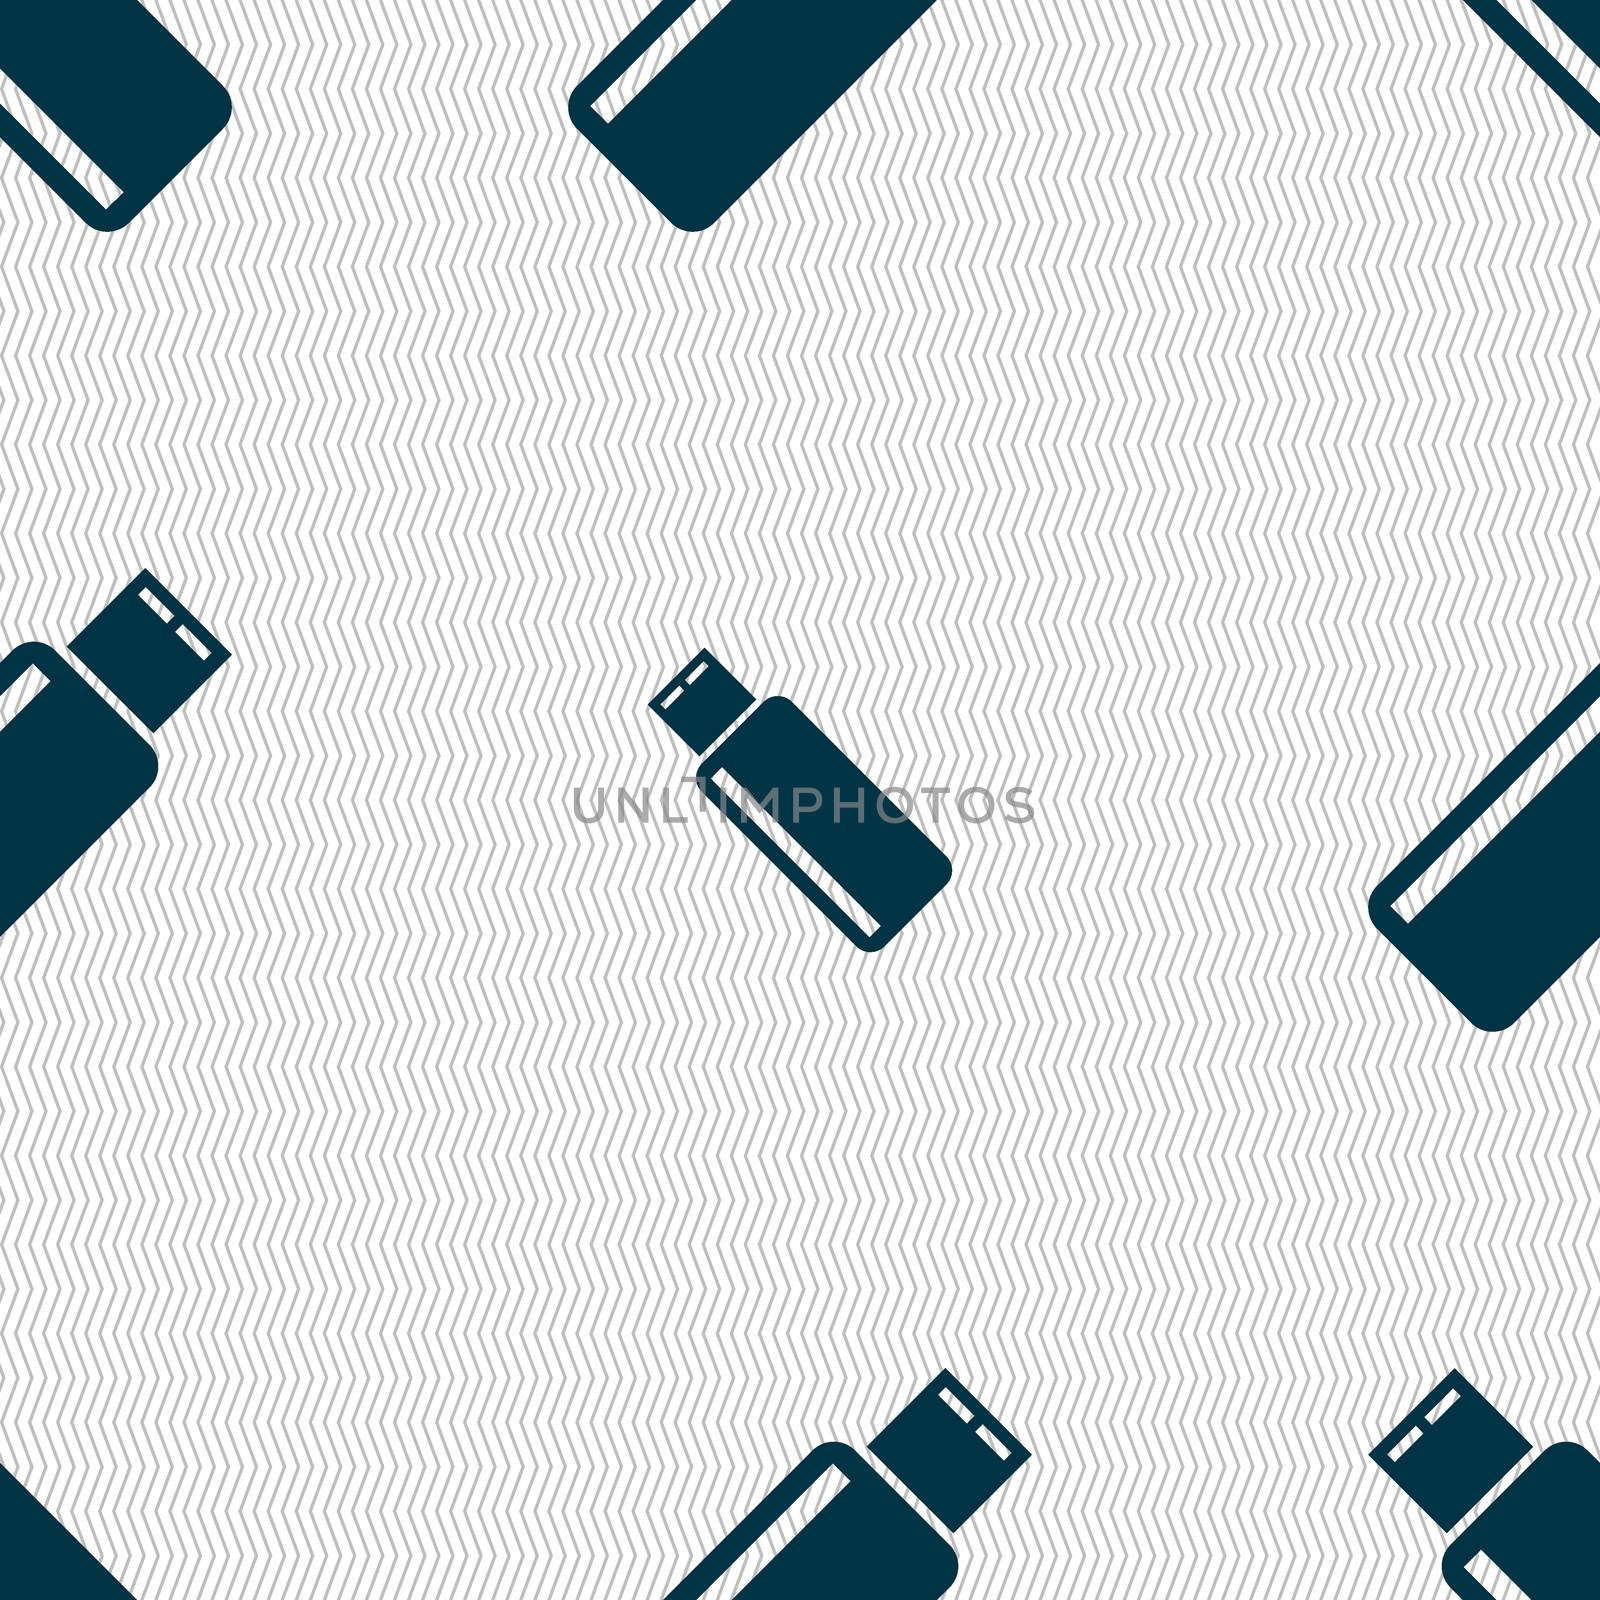 Usb sign icon. flash drive stick symbol. Seamless abstract background with geometric shapes.  by serhii_lohvyniuk